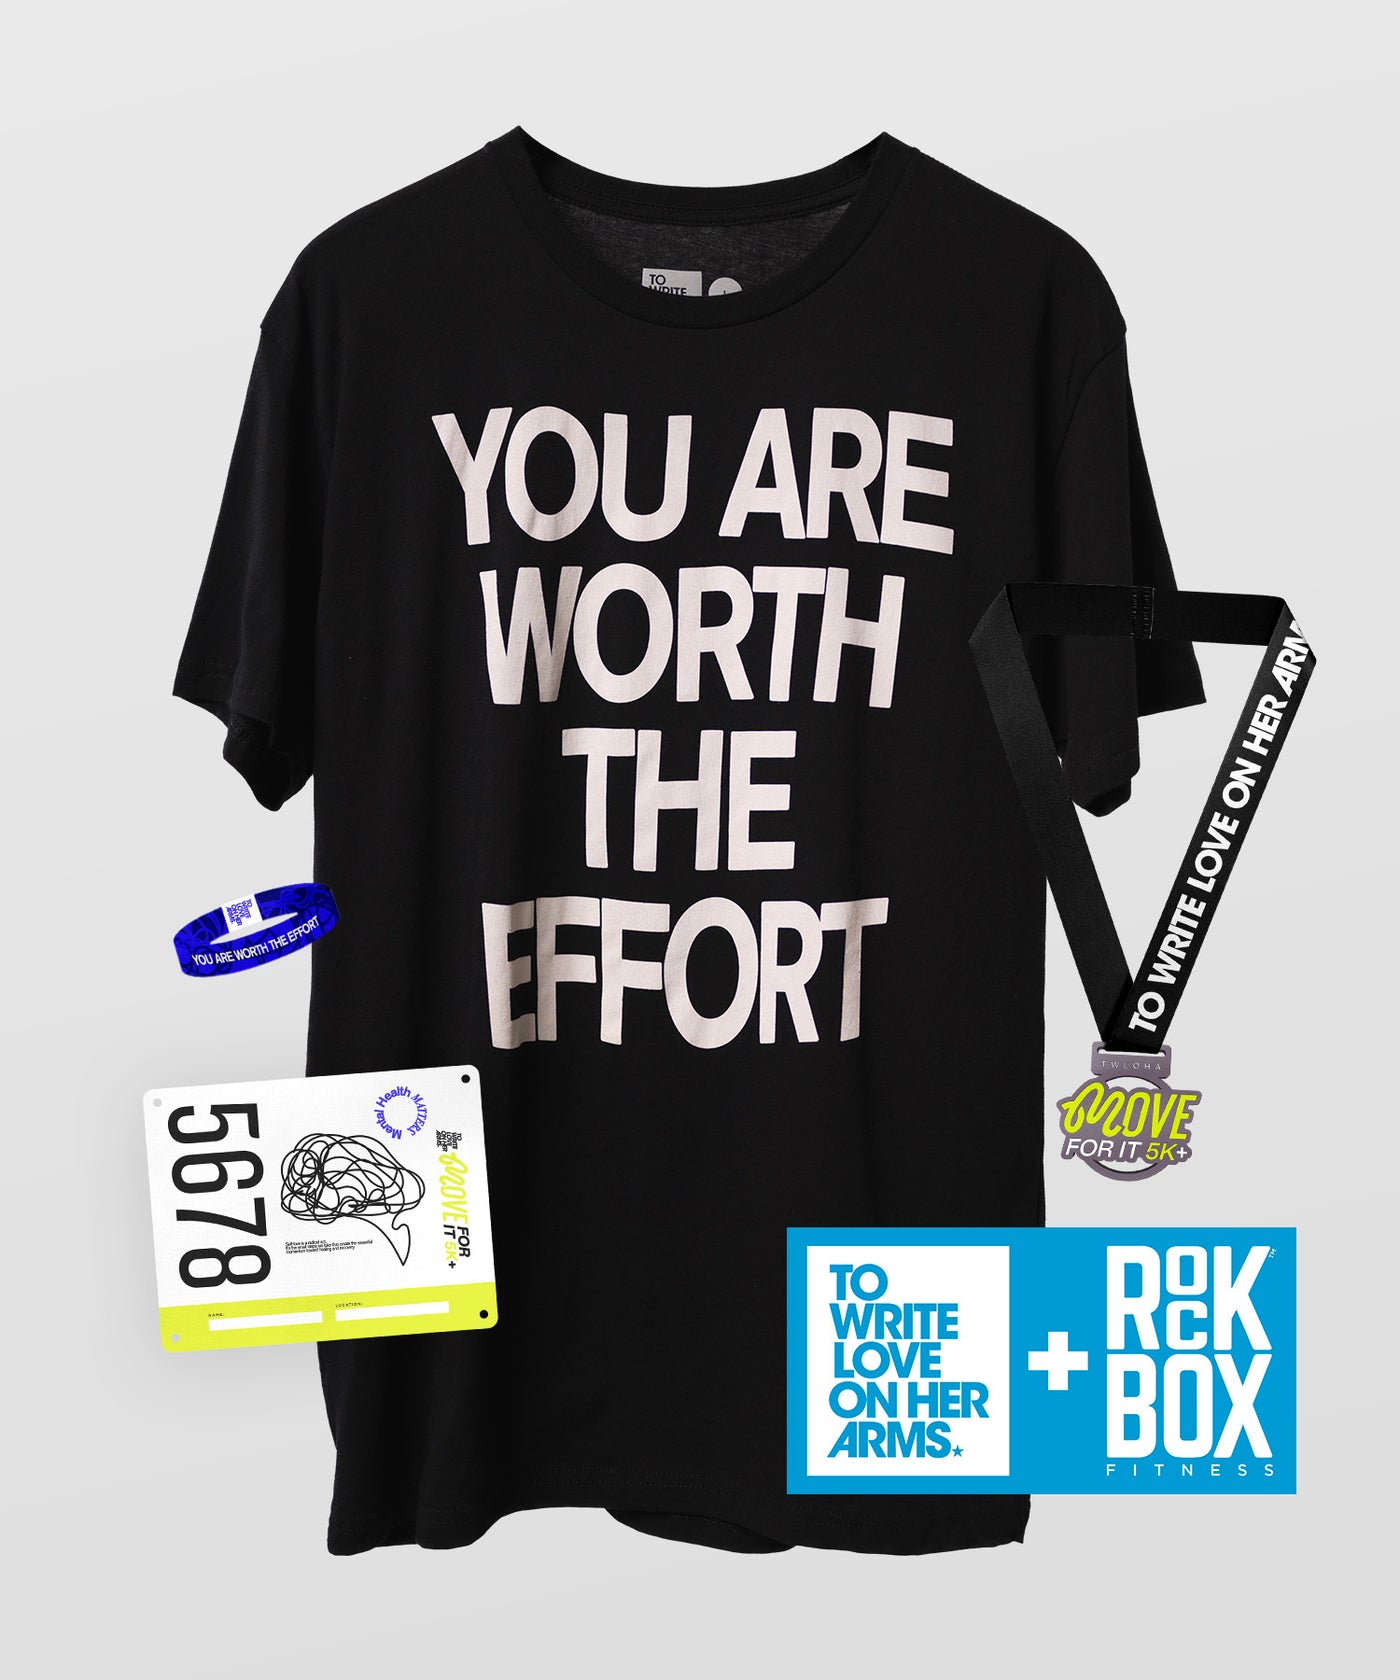 RockBox 2024 Move For It 5K+ Pack